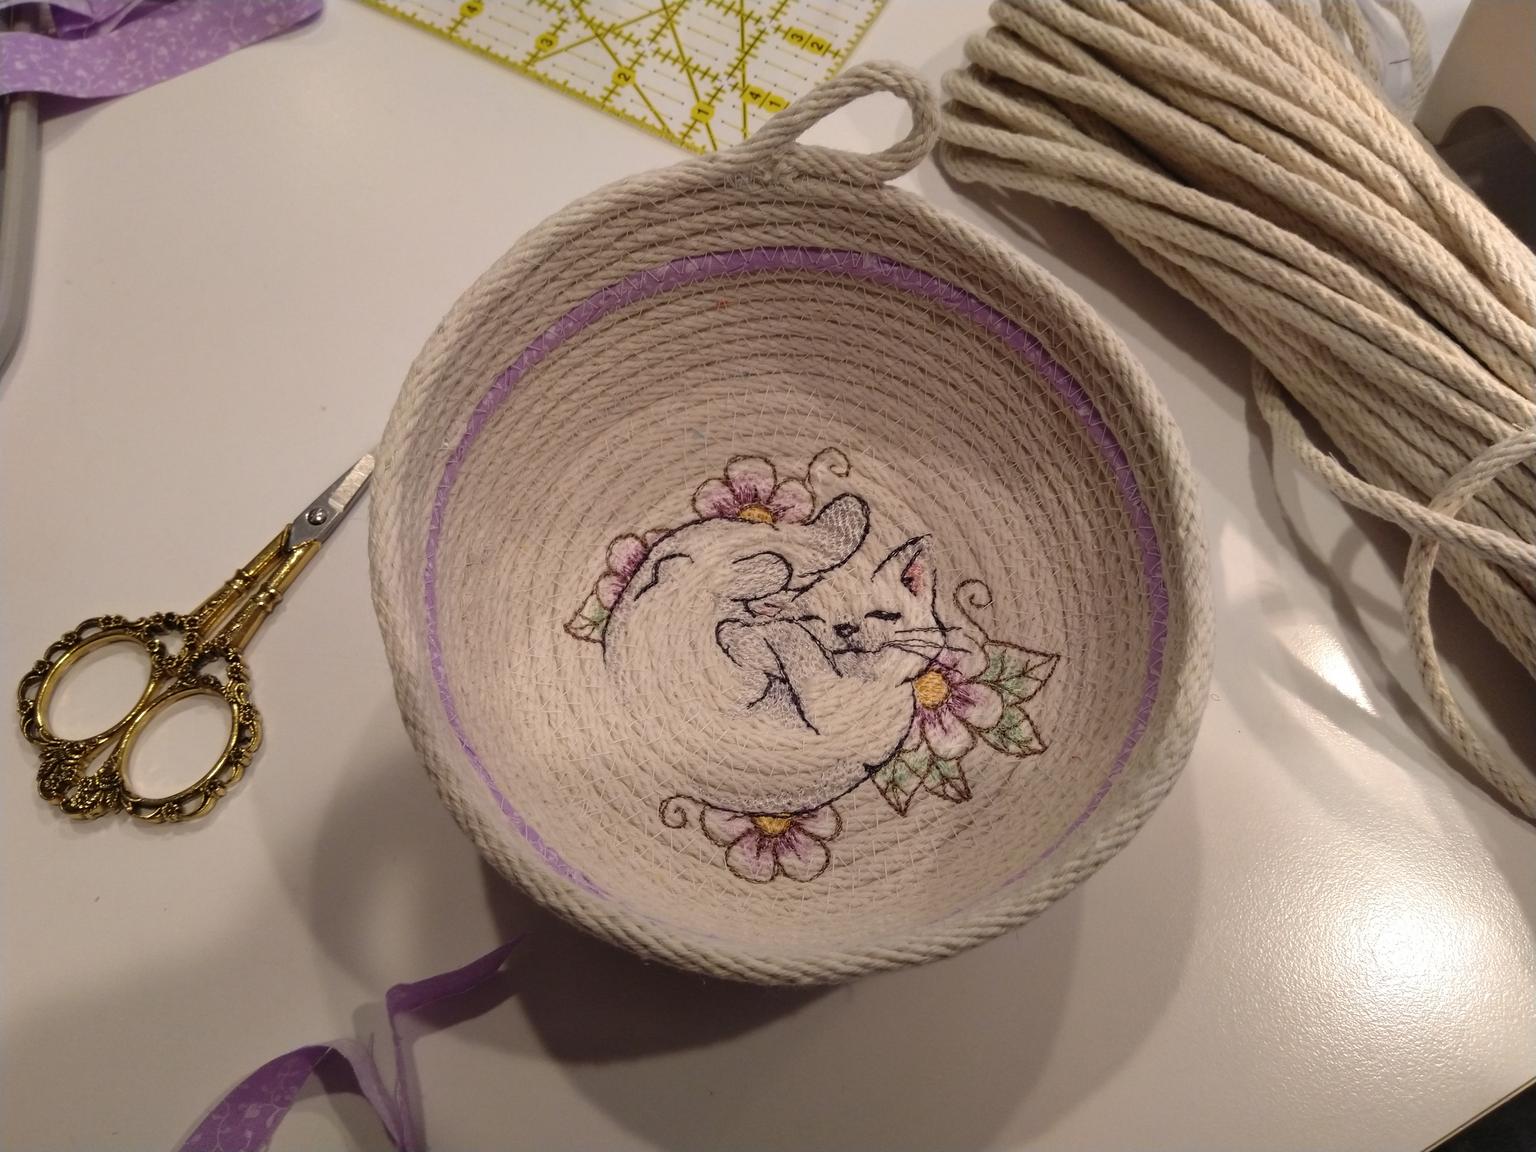 Today in “weird things to embroider on”: clothesline